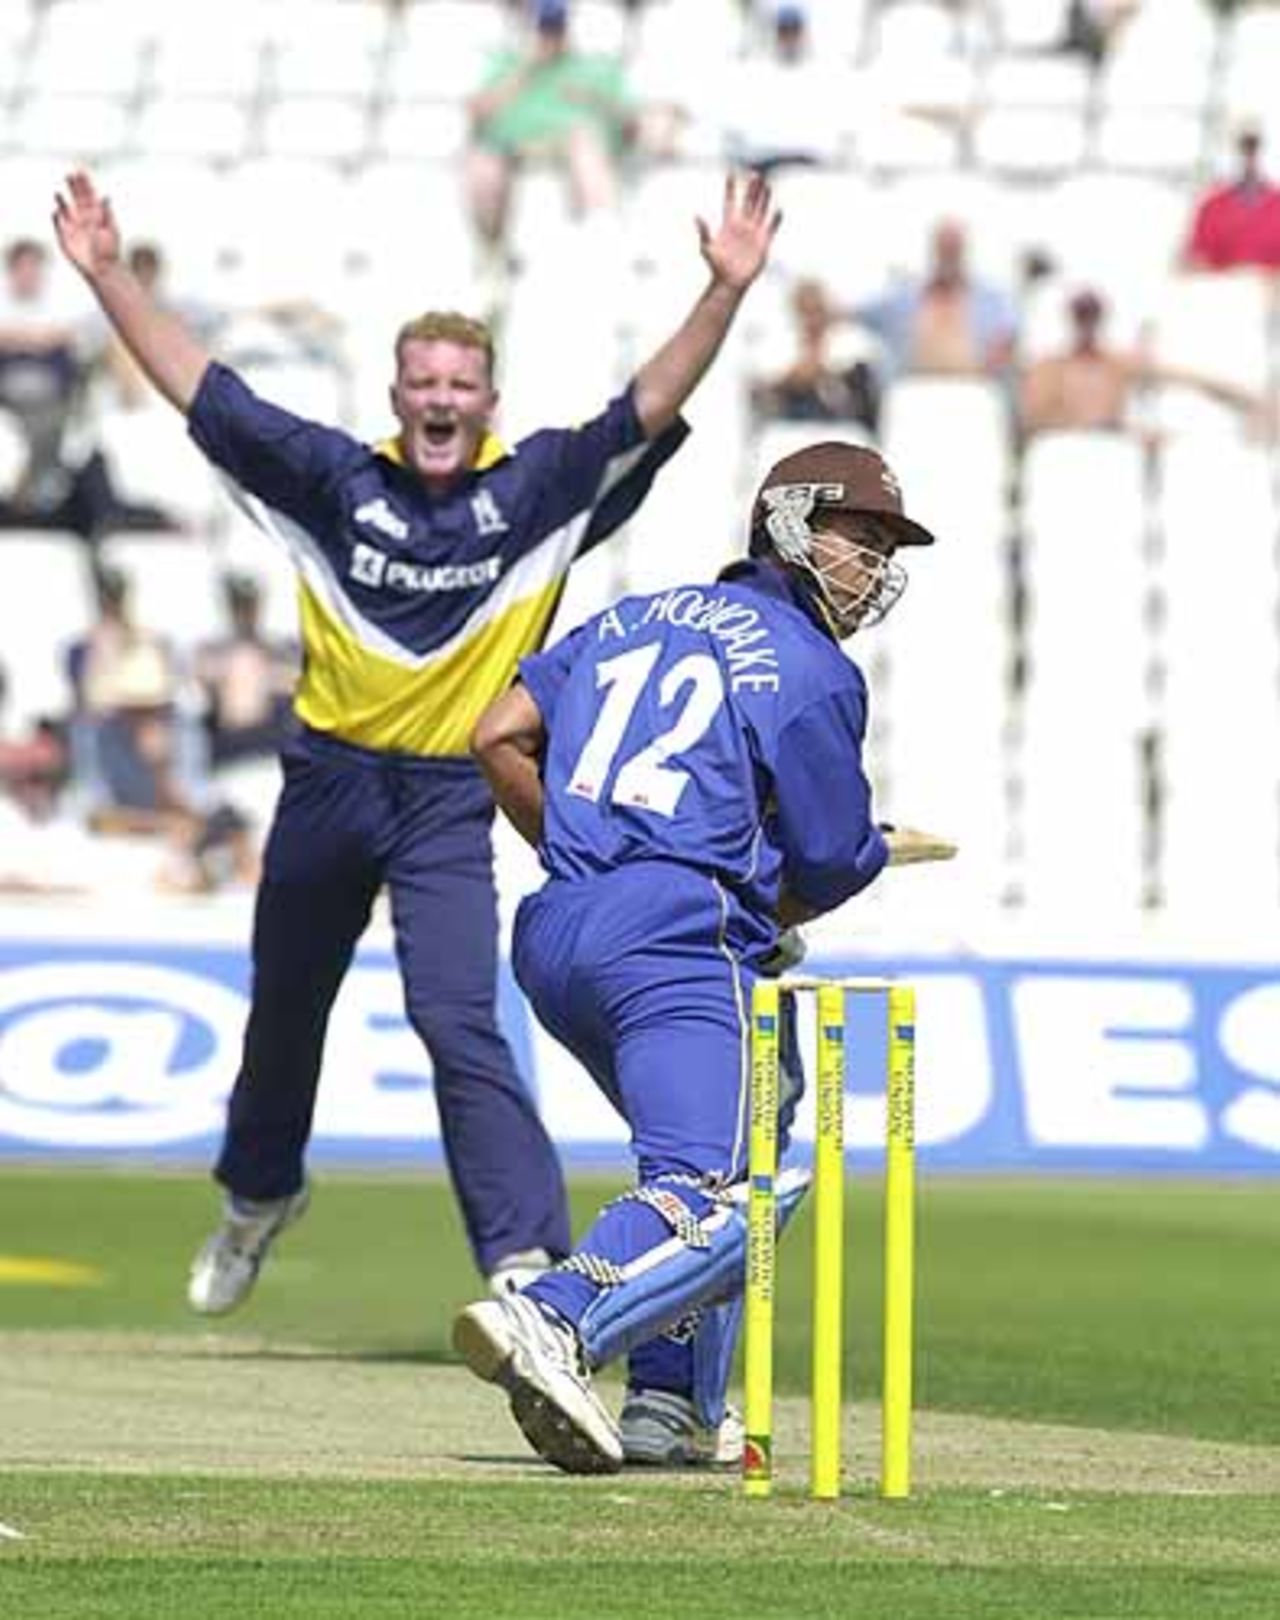 Dougie Brown wants the wicket of Adam Hollioake but not out, Norwich Union League , 29th July 2001, Birmingham